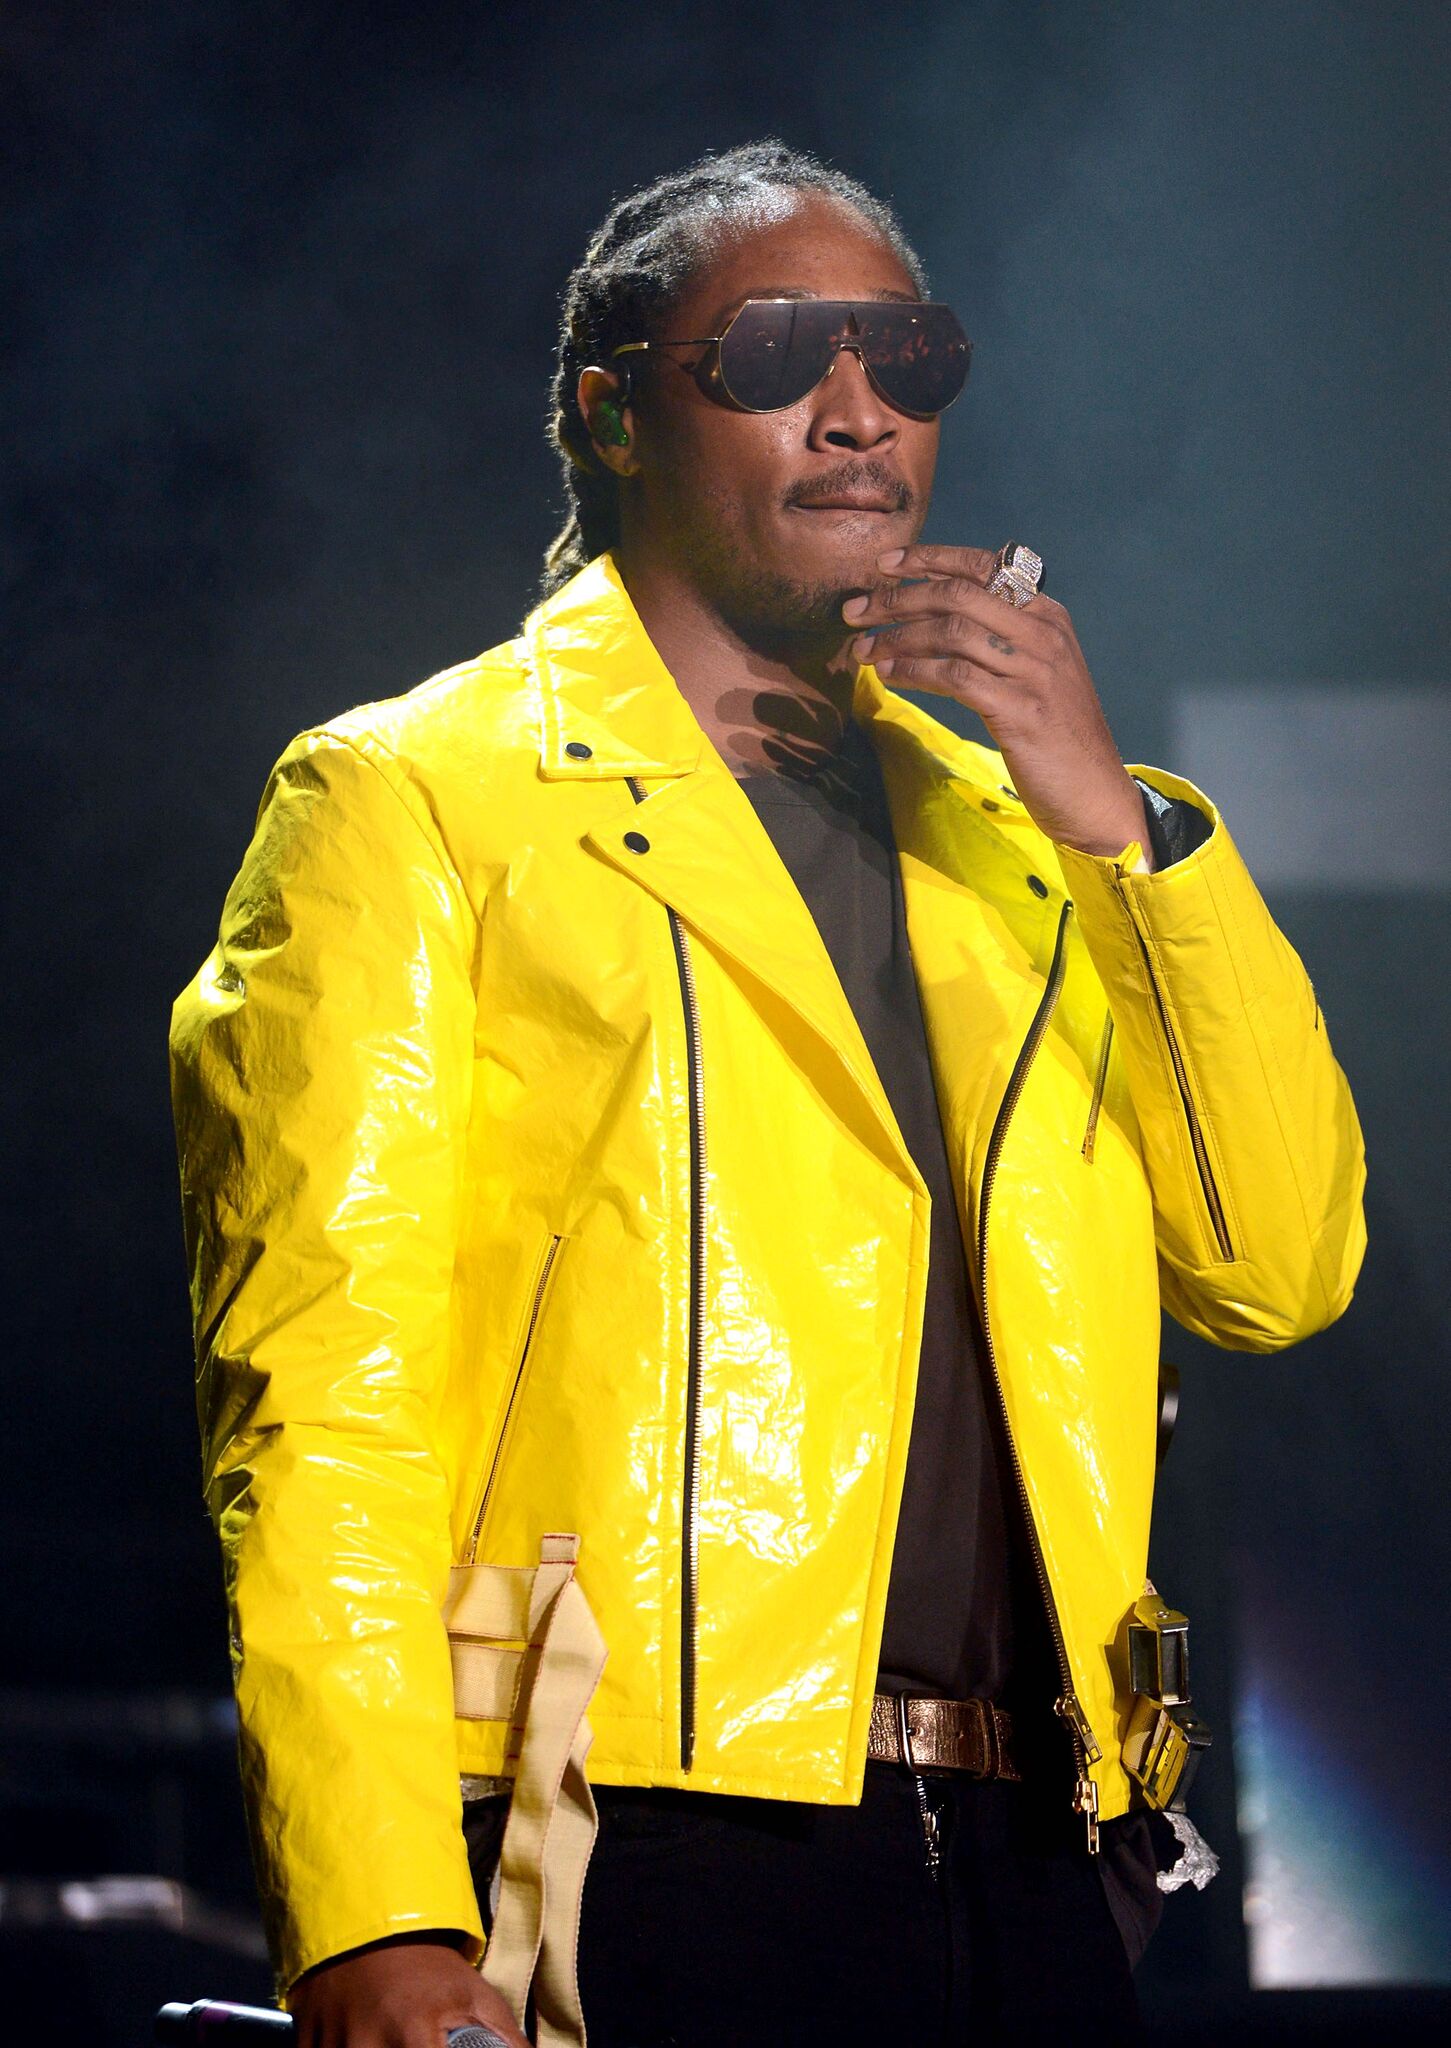 Rapper Future performs onstage during the "Nobody Safe" tour at The Forum | Getty Images